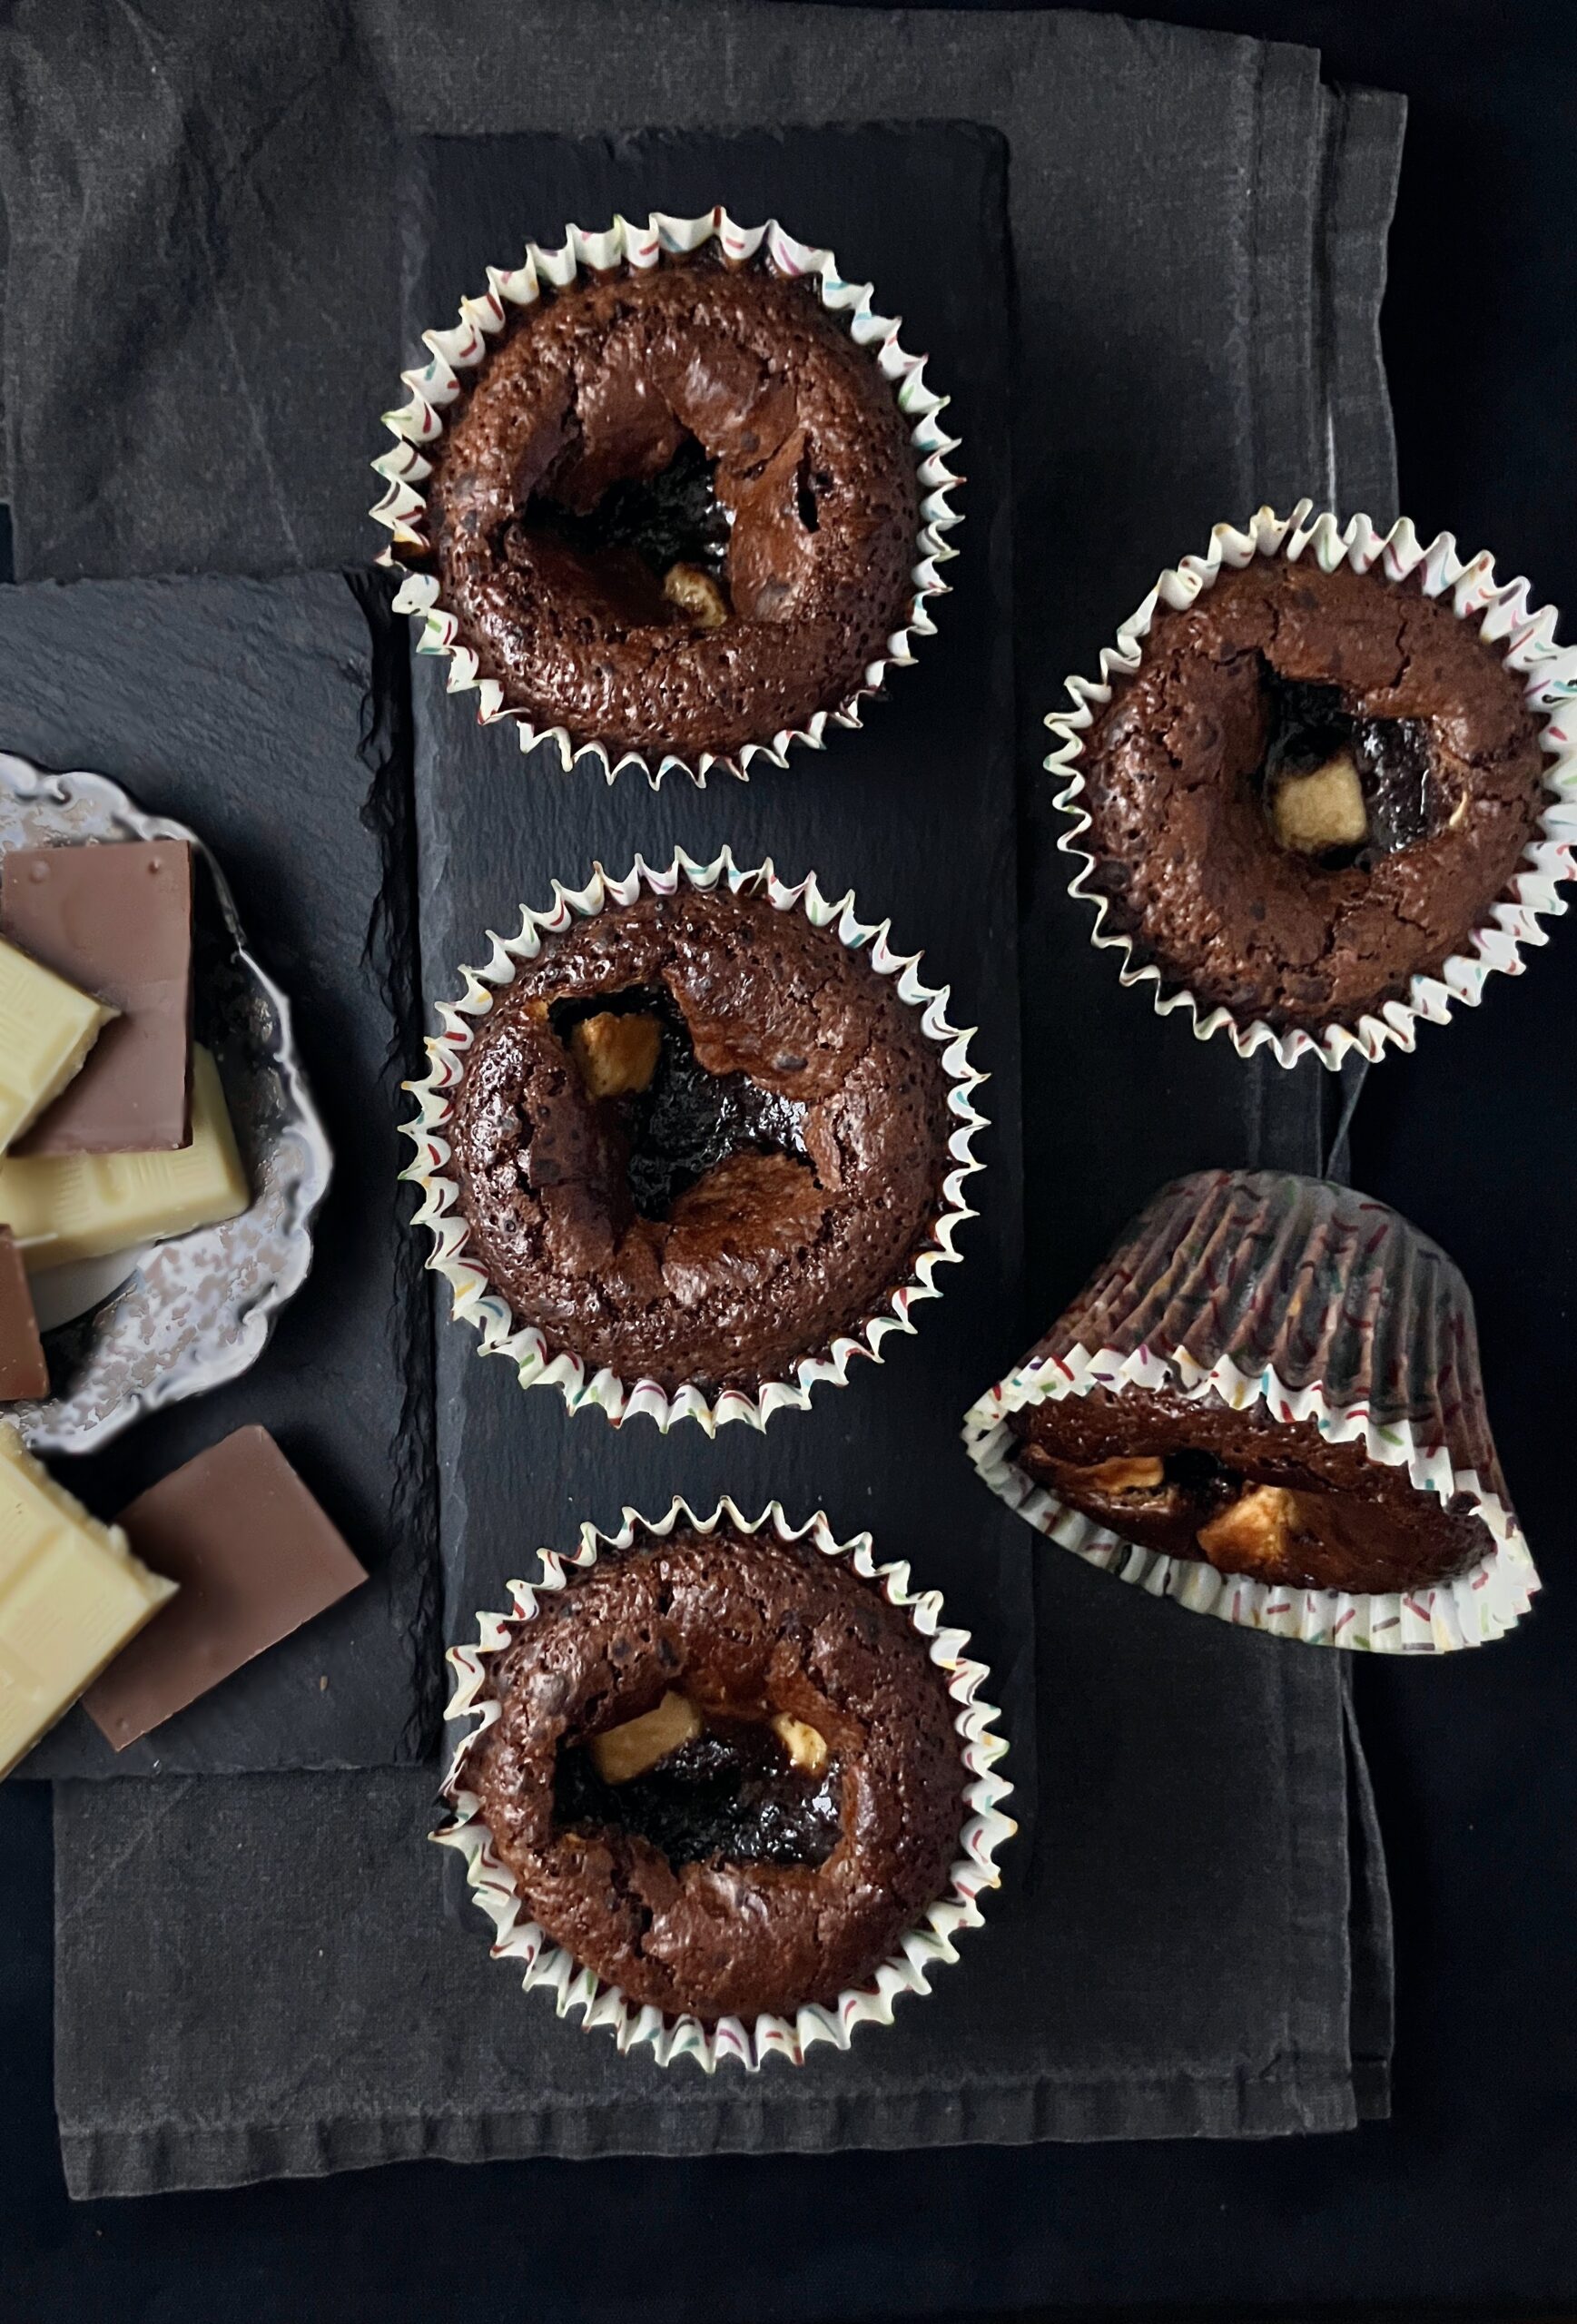 Five chocolate muffins on a dark background with white and dark chocolate to the side